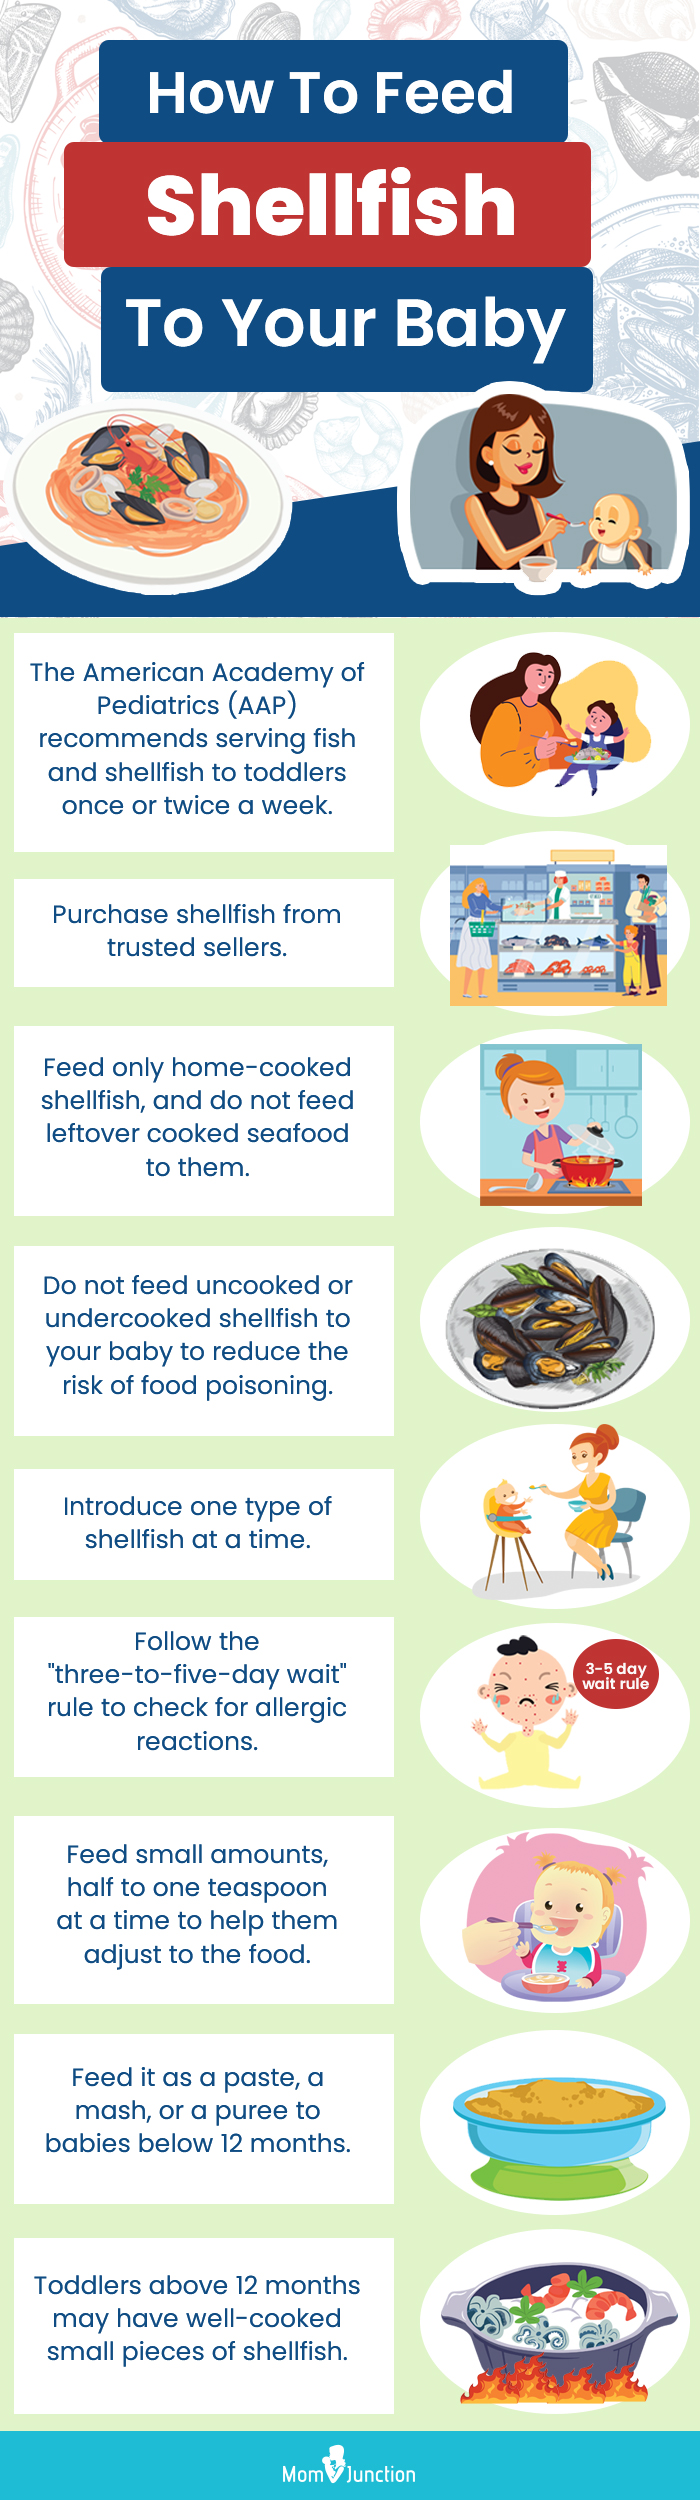 how to feed shellfish to your baby (infographic)